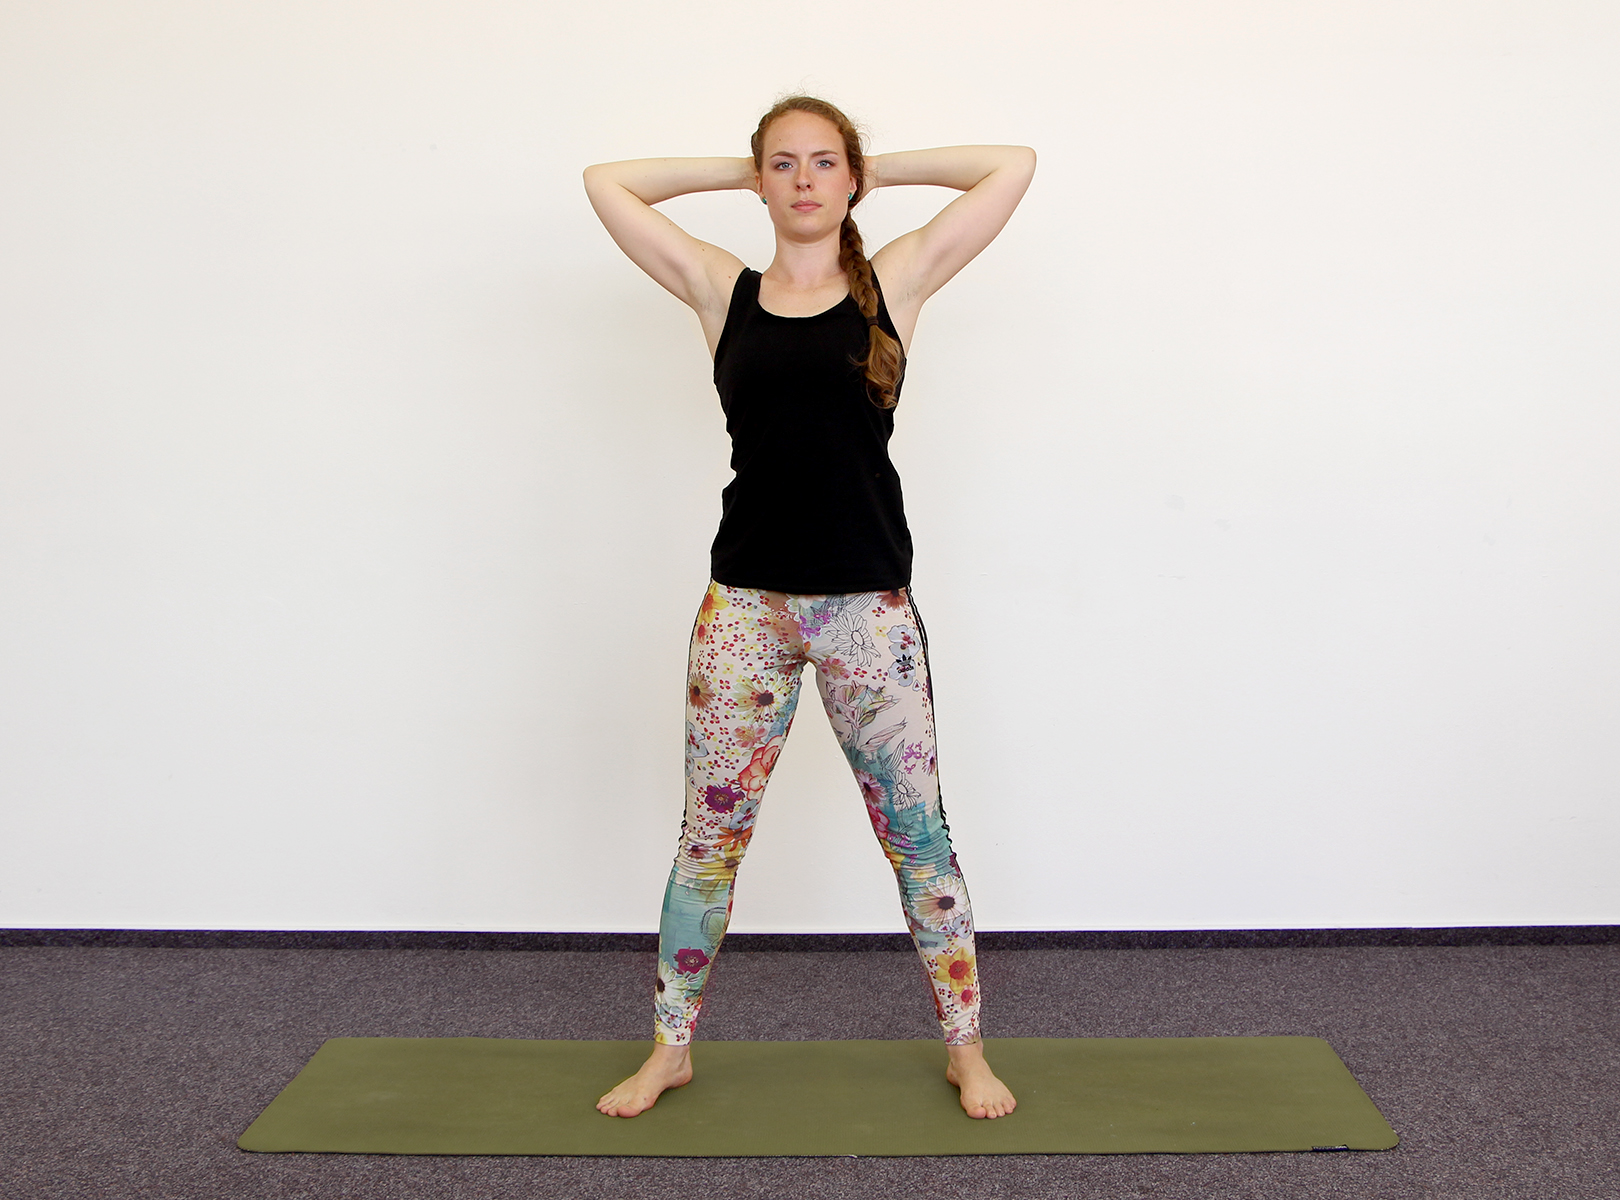 8 Reasons to Do Standing Yoga Poses